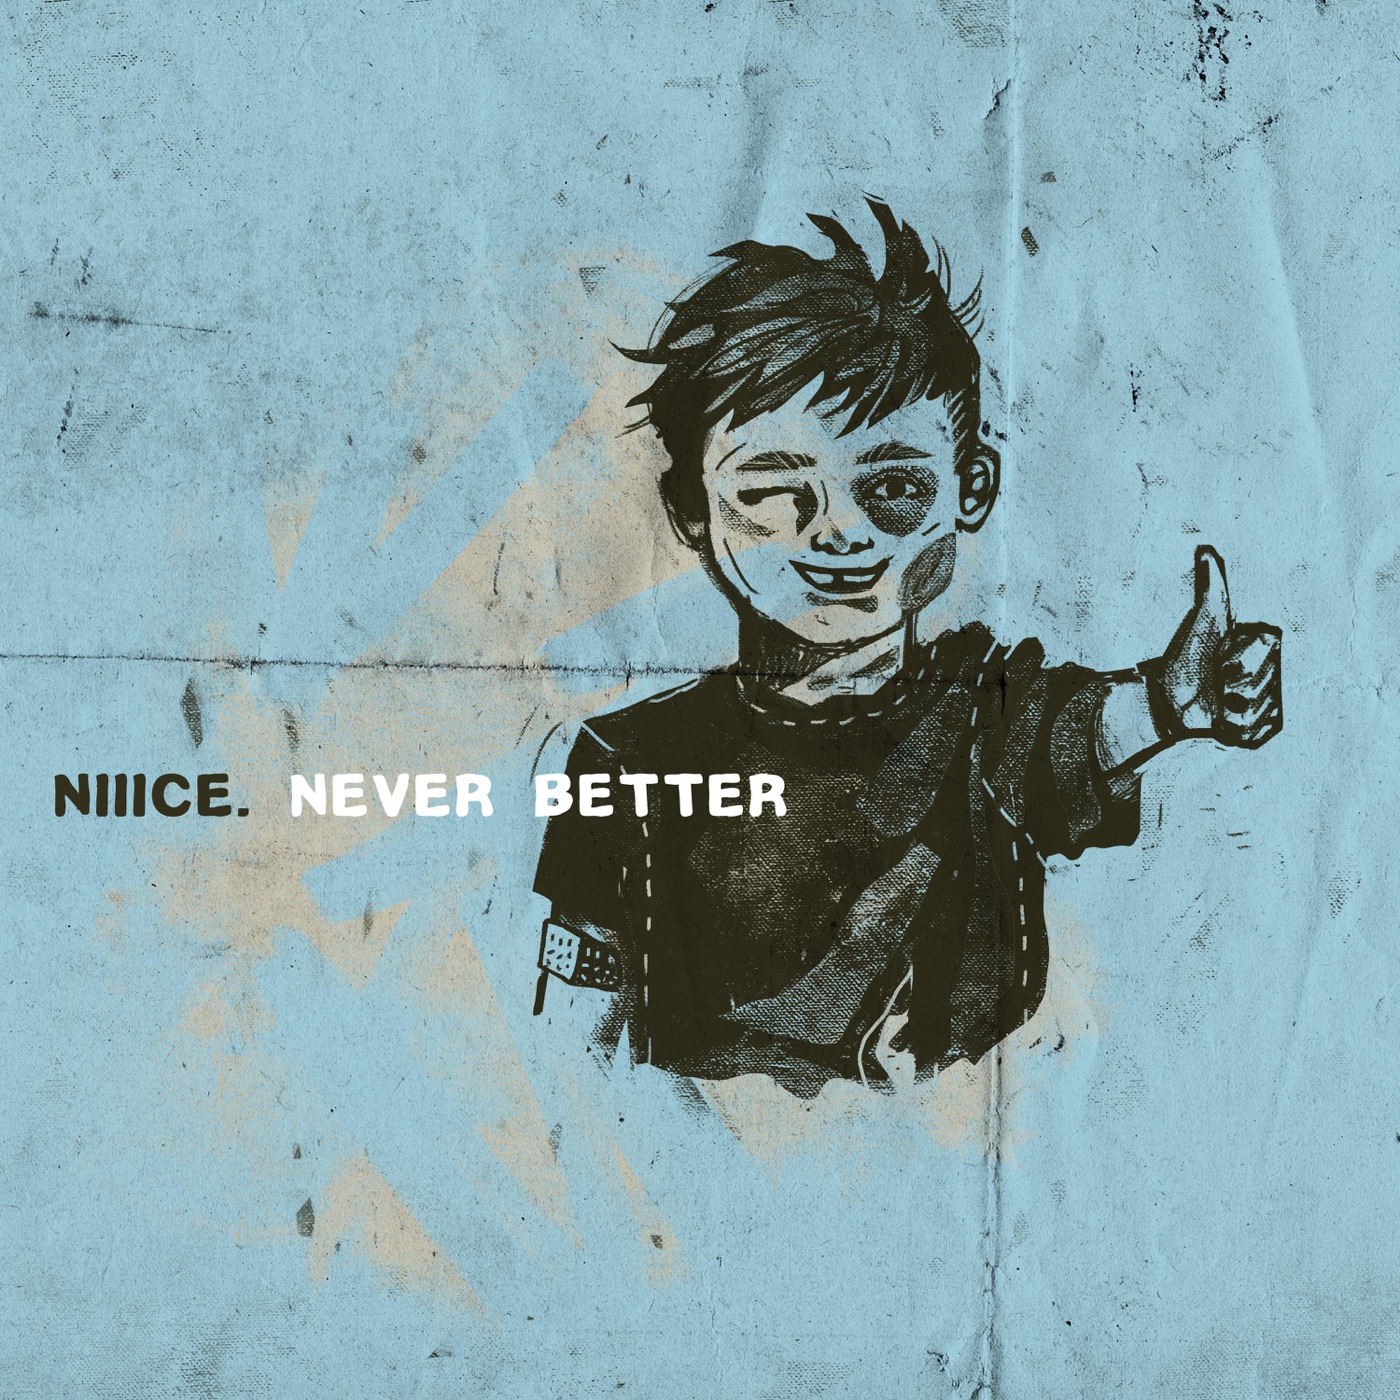 Never Better by Niiice.